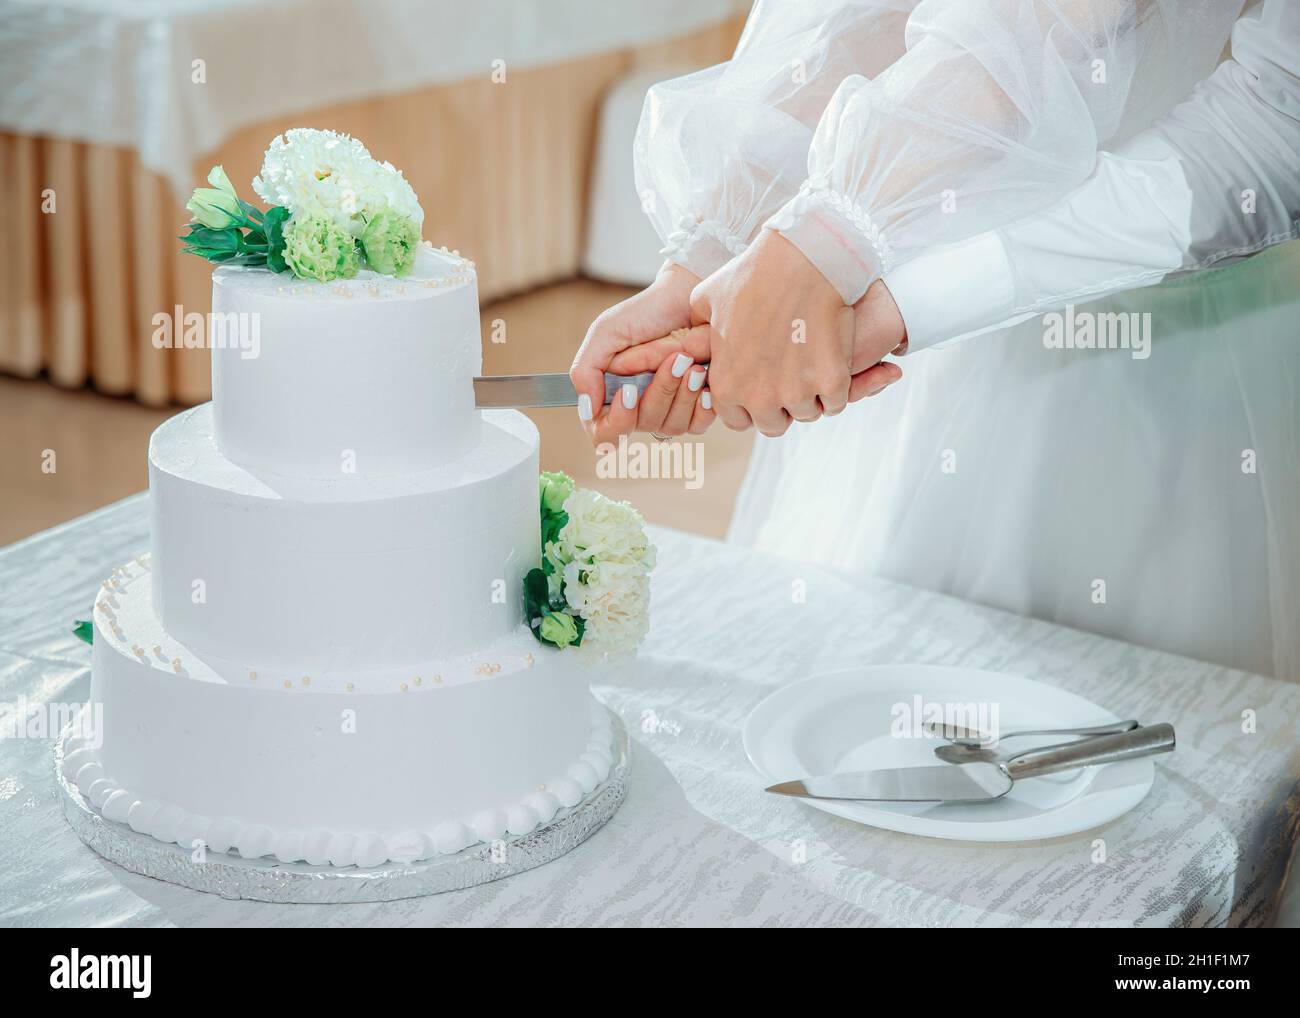 Newlyweds cut the wedding cake. A bride and a groom hands are holding a knife, close up. Beautiful white three-tiered cake decorated with flowers Stock Photo